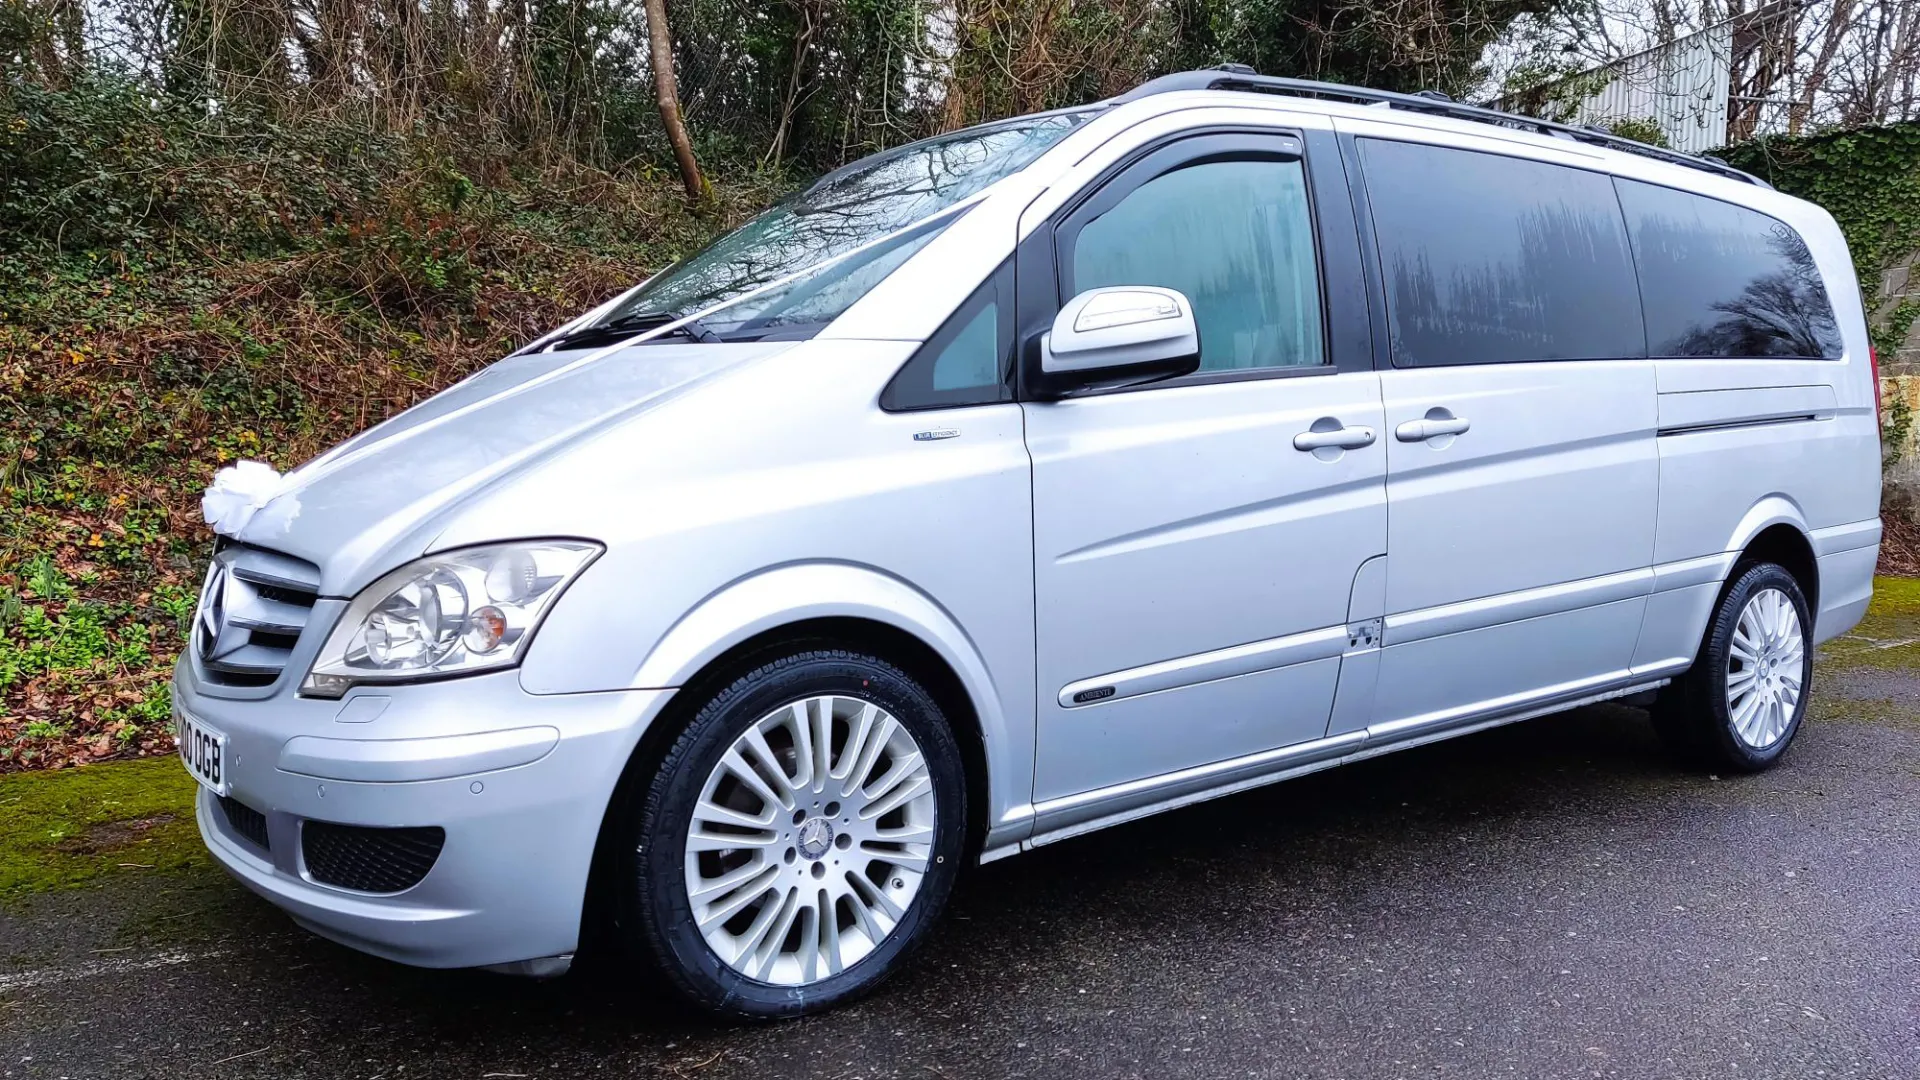 Side view of Silver 7-seater Mercedes Viano decorated with white ribbons